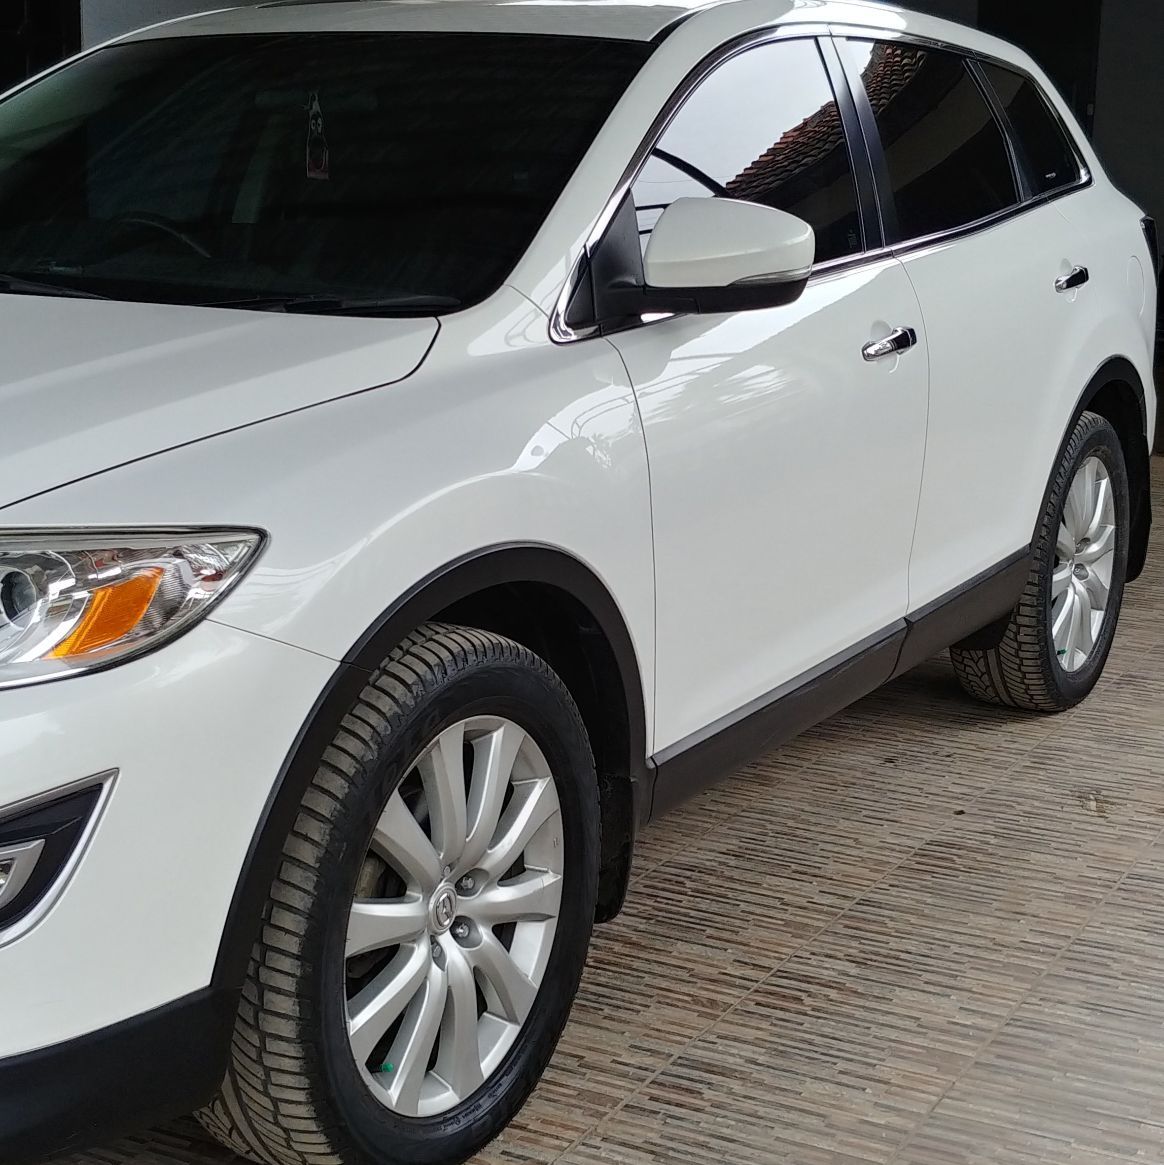 Used 2010 Mazda CX 9 AWD AWD for sale